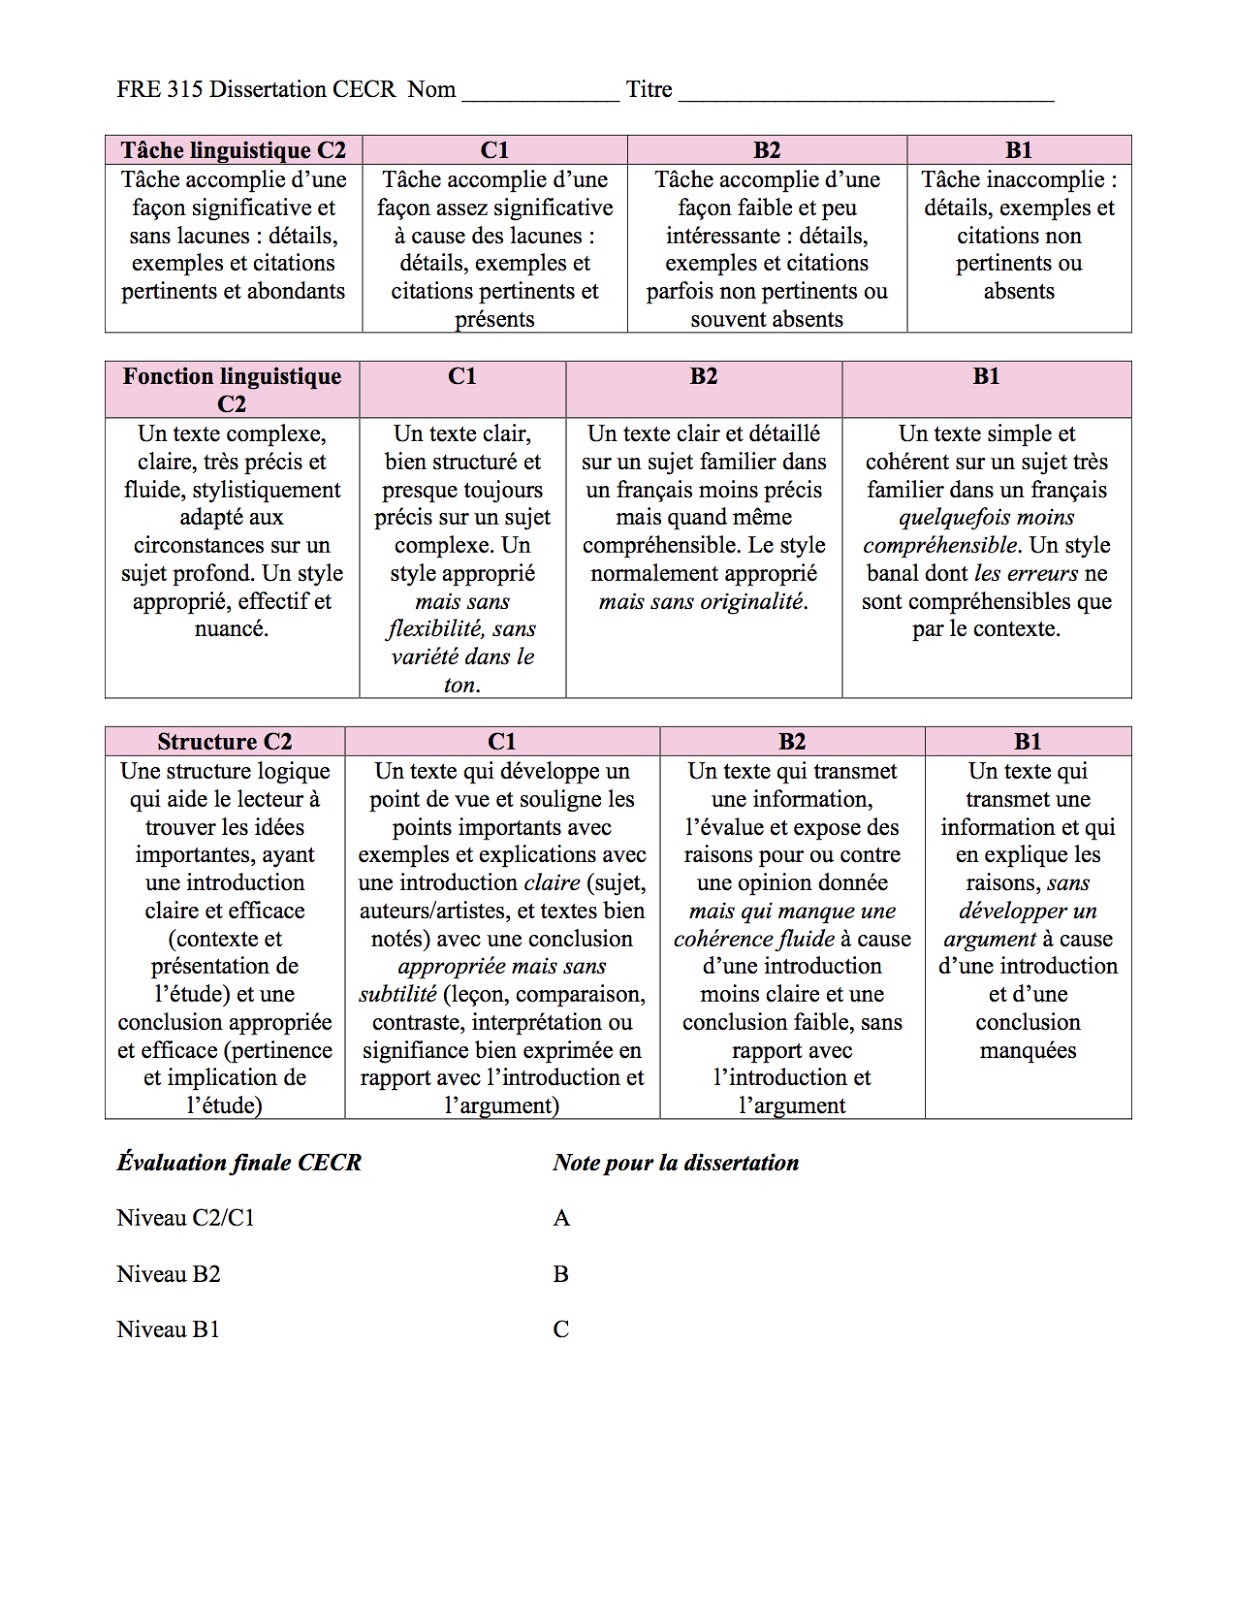 Assessment matters: Self-assessment and 'Can do' statements